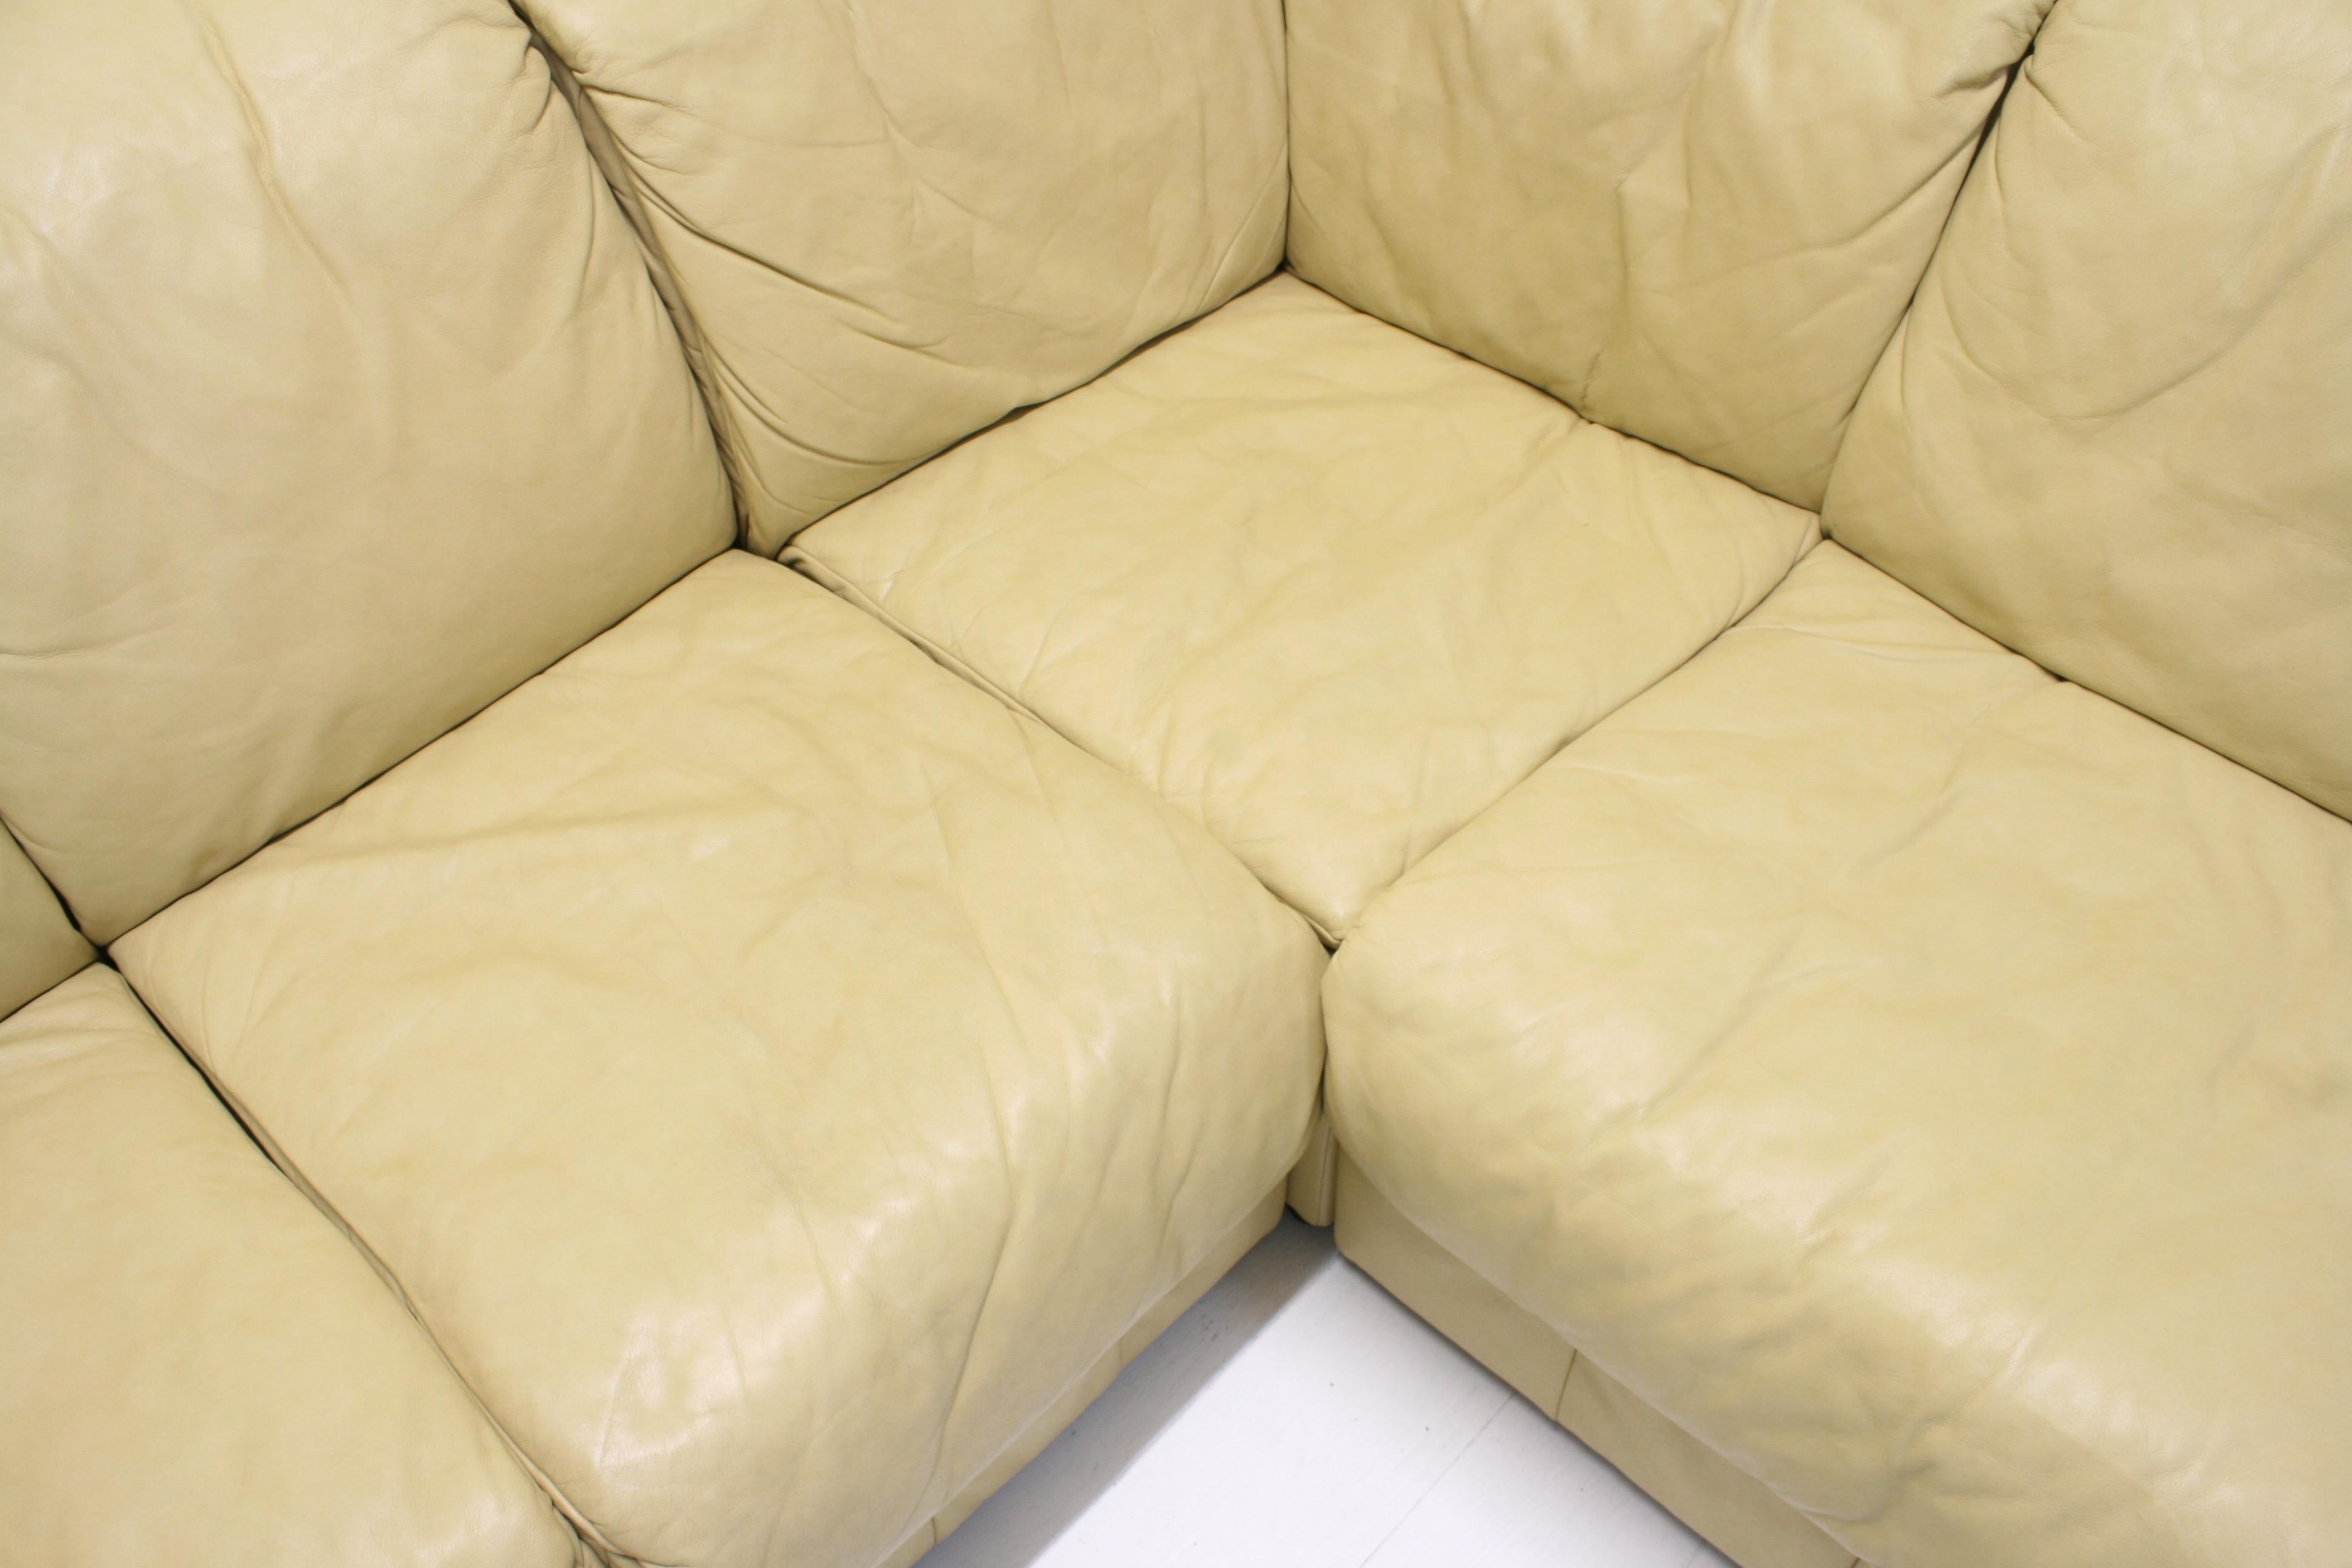 8 Piece Modular Snake Sofa in Yellow Pastel Quilted Leather from Laauser For Sale 3